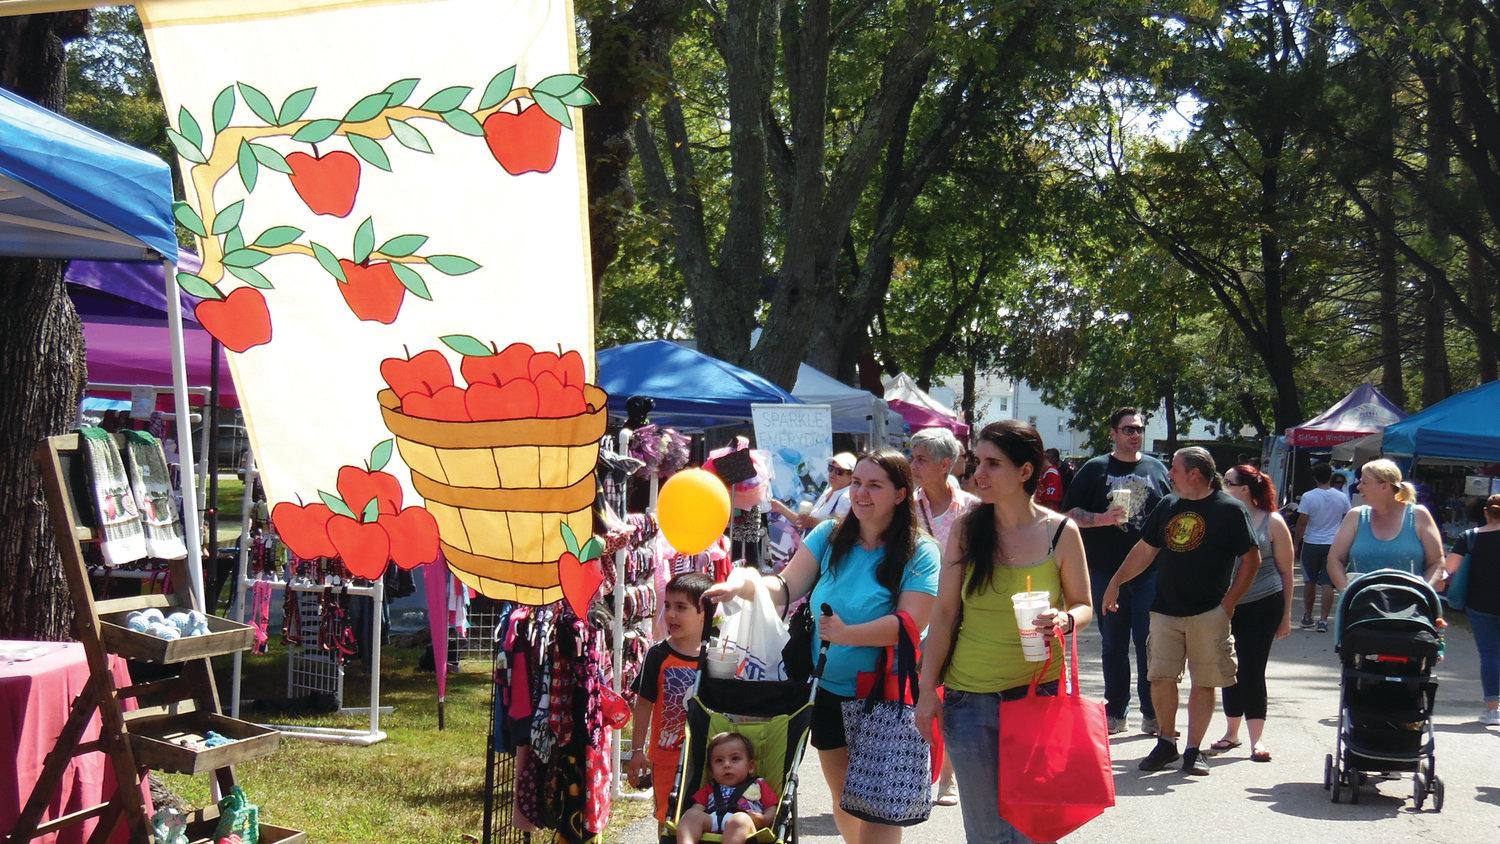 The Northern Rhode Island Chamber of Commerce and The Washington Trust Company present the return of the annual Apple Festival on Saturday, Sept. 11 and Sunday, Sept. 12 from 10 a.m. to 5 p.m. at Johnston Memorial Park, 1583 Hartford Ave., Johnston.